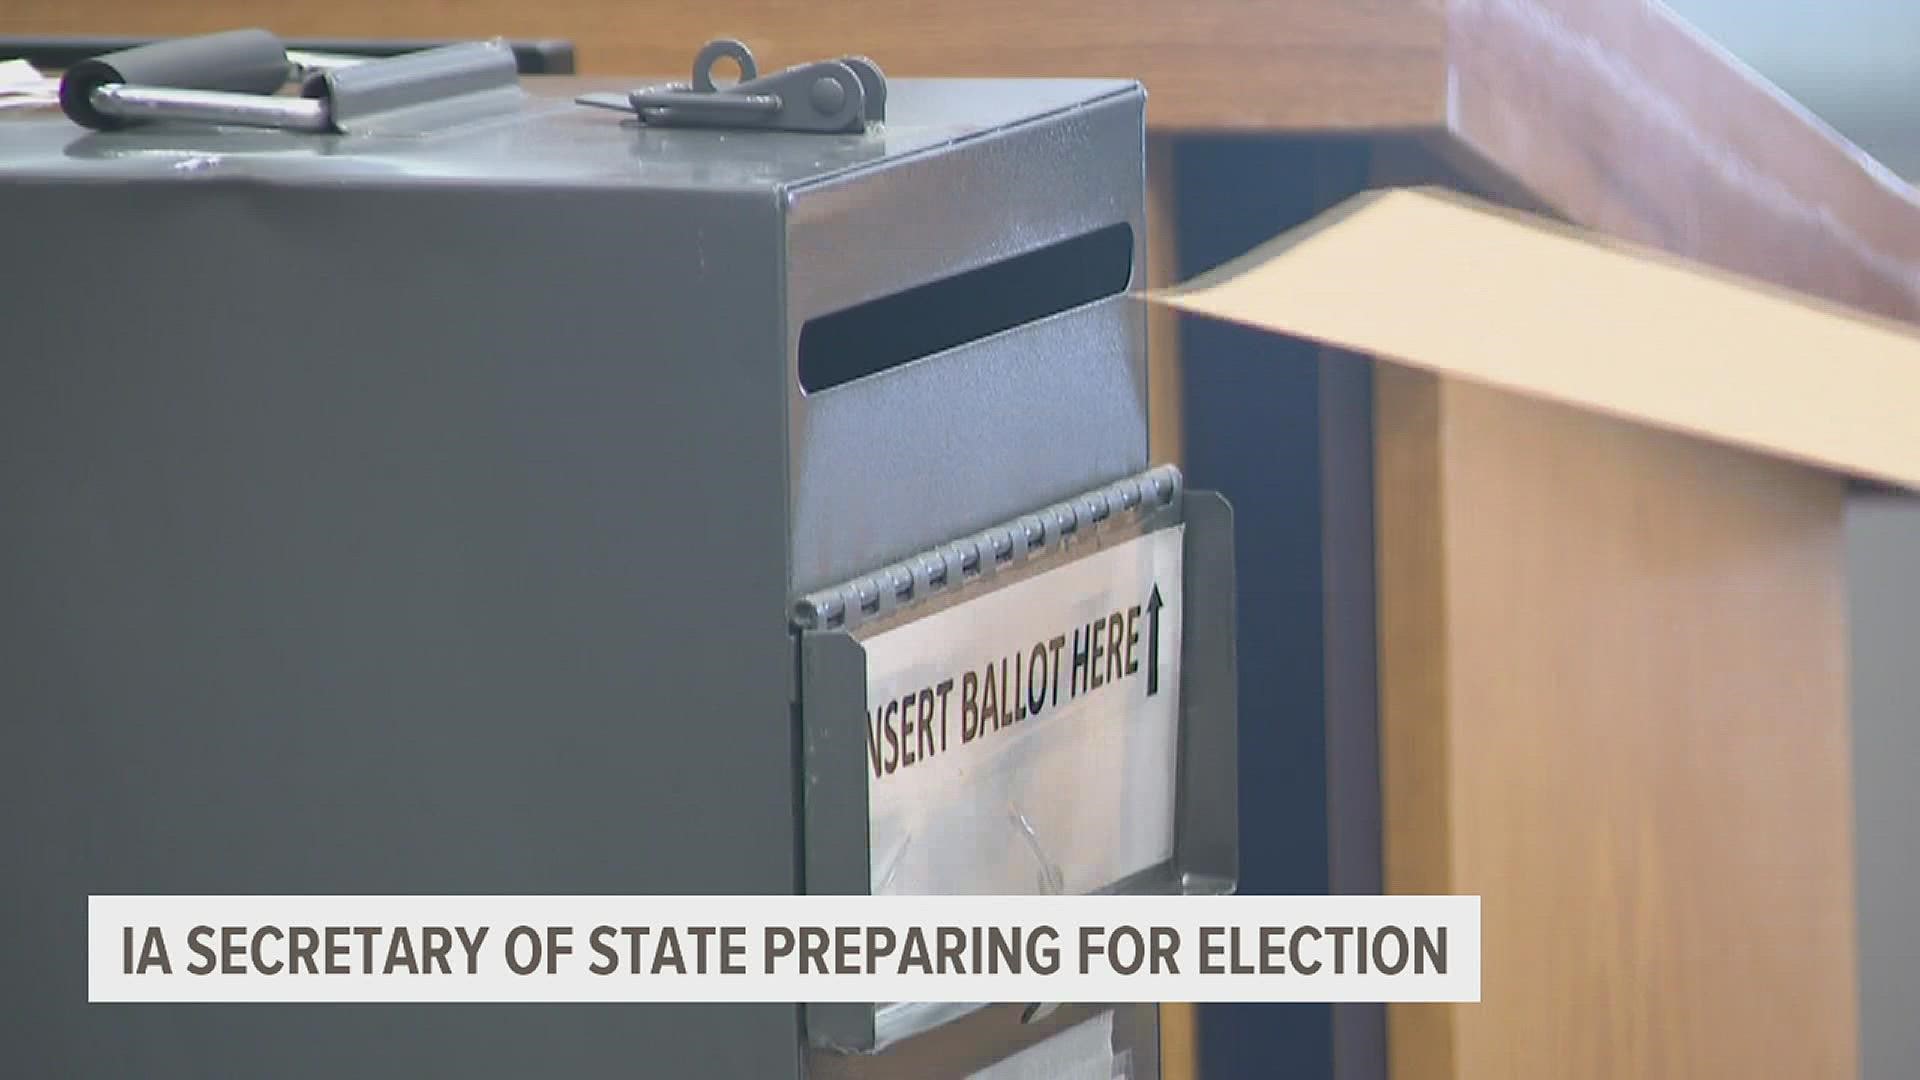 Sec. Paul Pate said that if you haven't submitted your absentee ballot yet, you should deliver it to your county's Auditor's Office instead of mailing it.